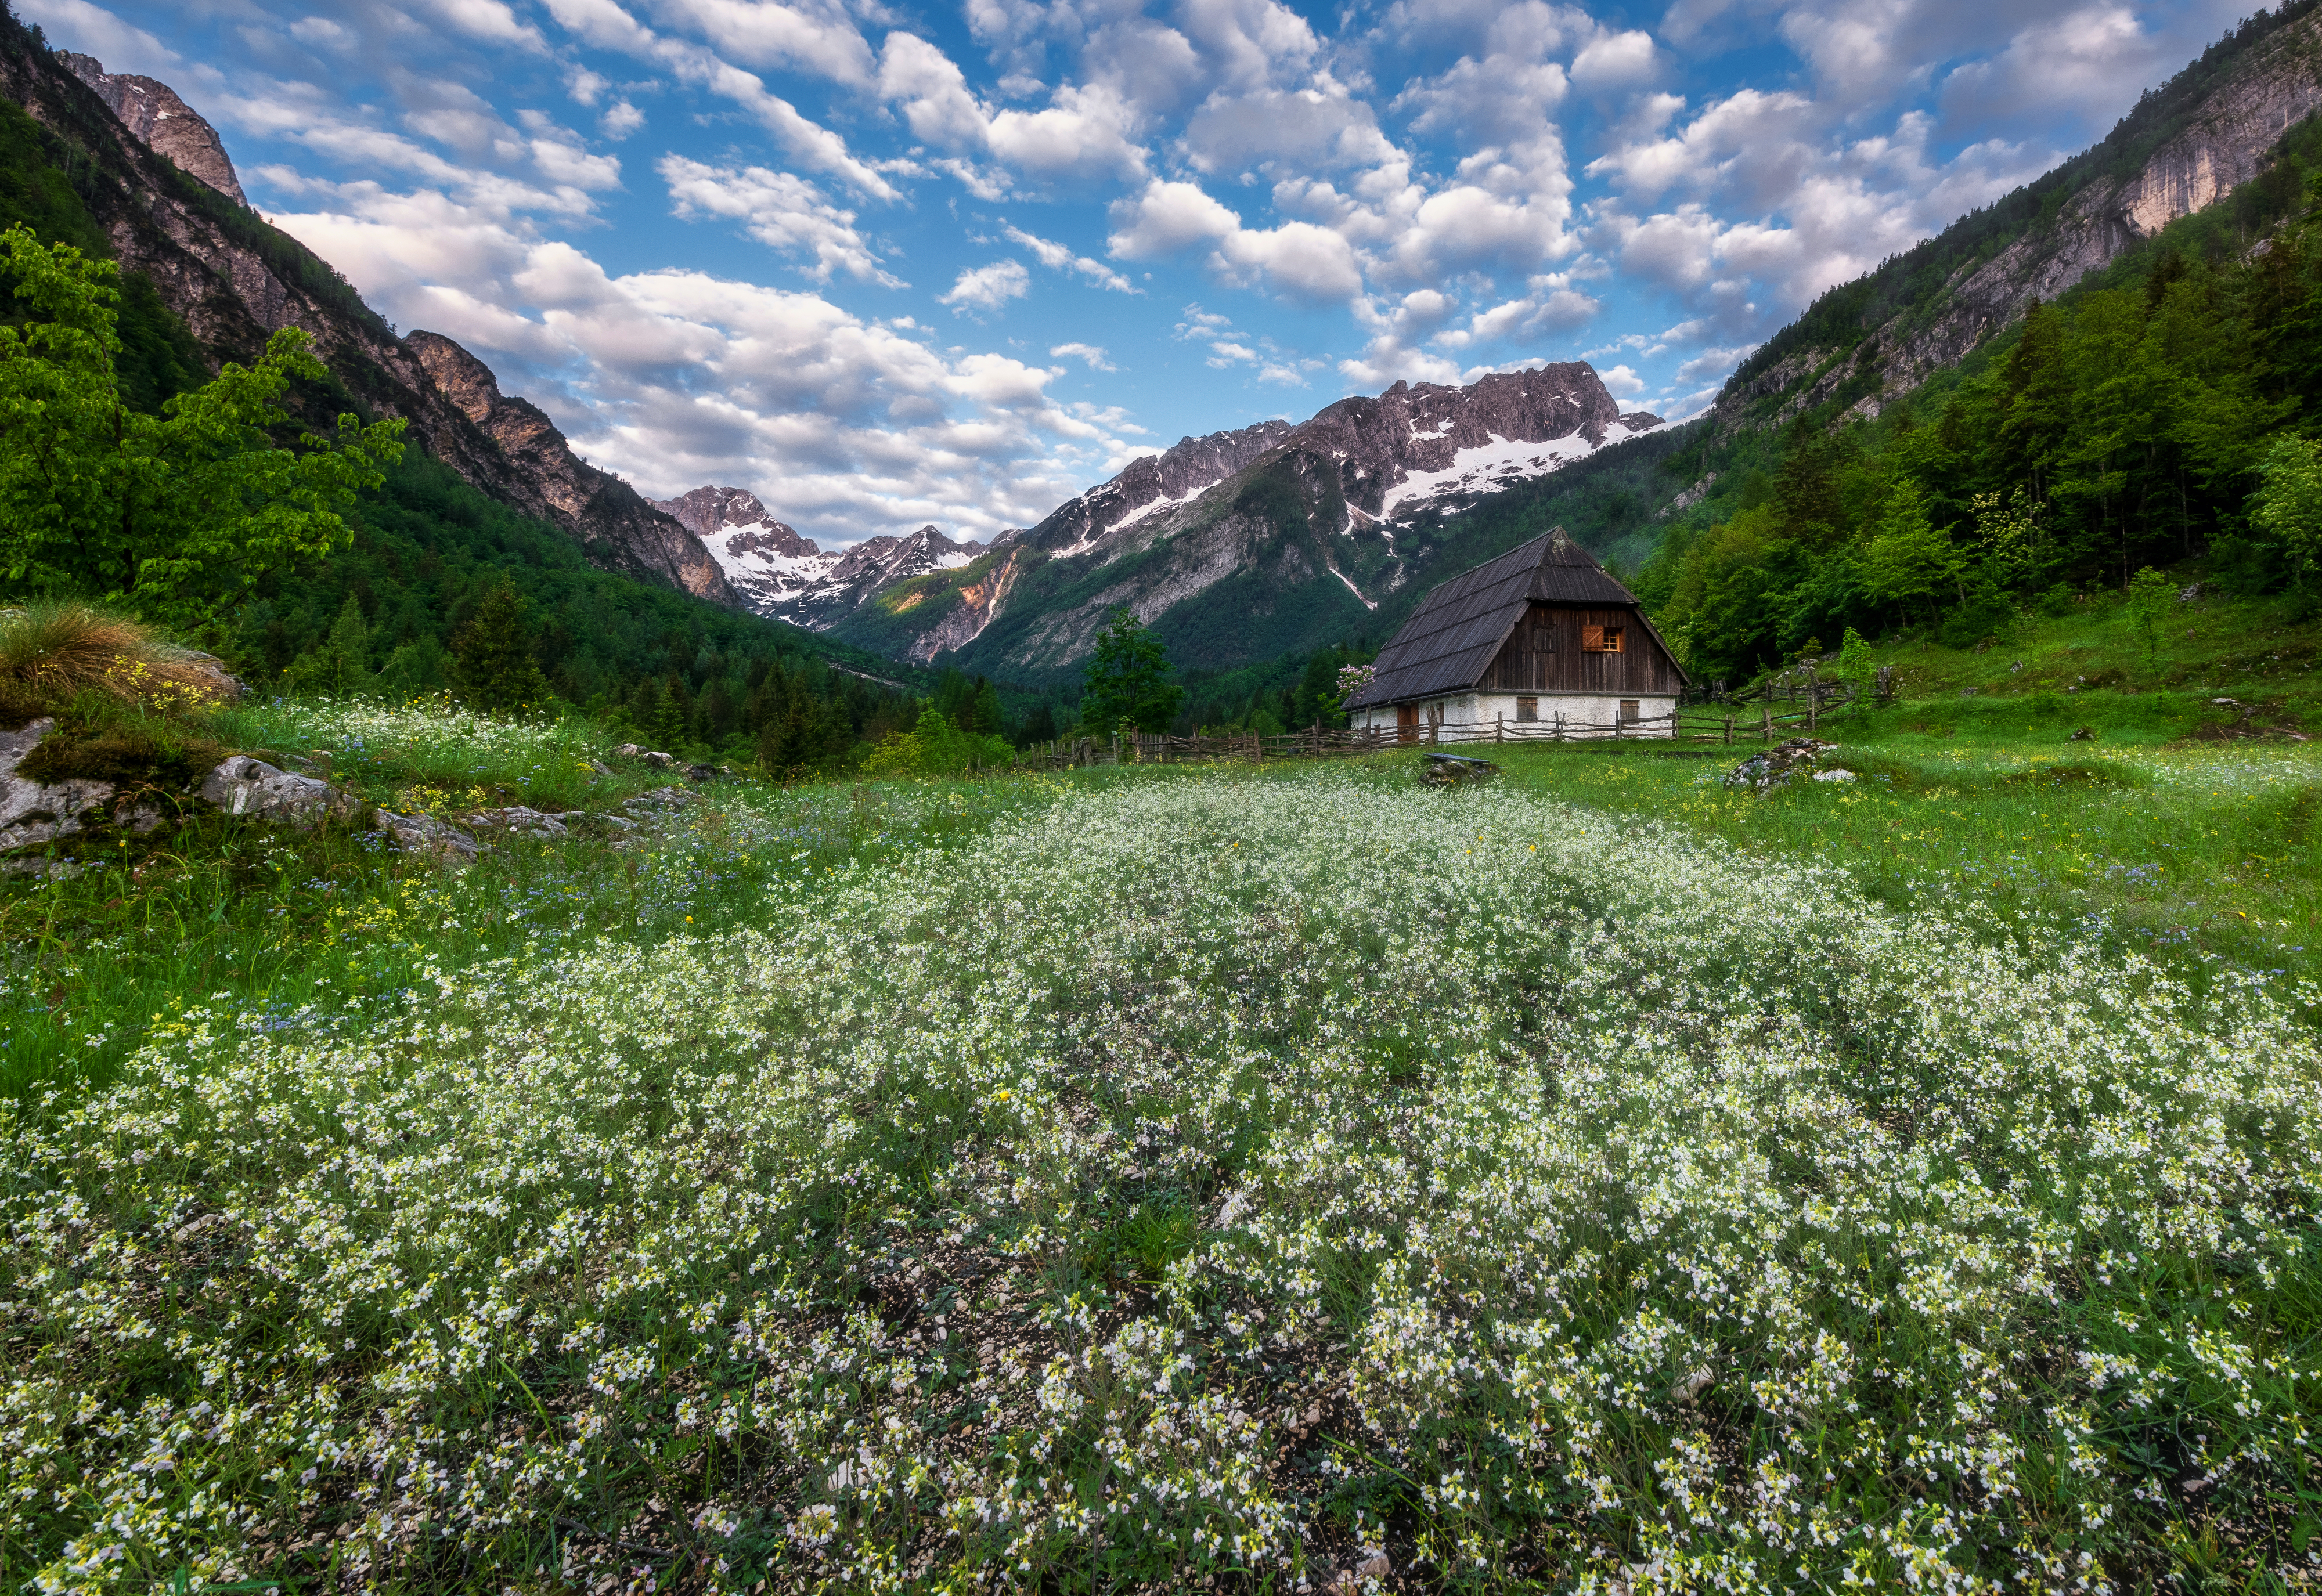 Cottage Flower House Meadow Mountain Spring 4000x2750